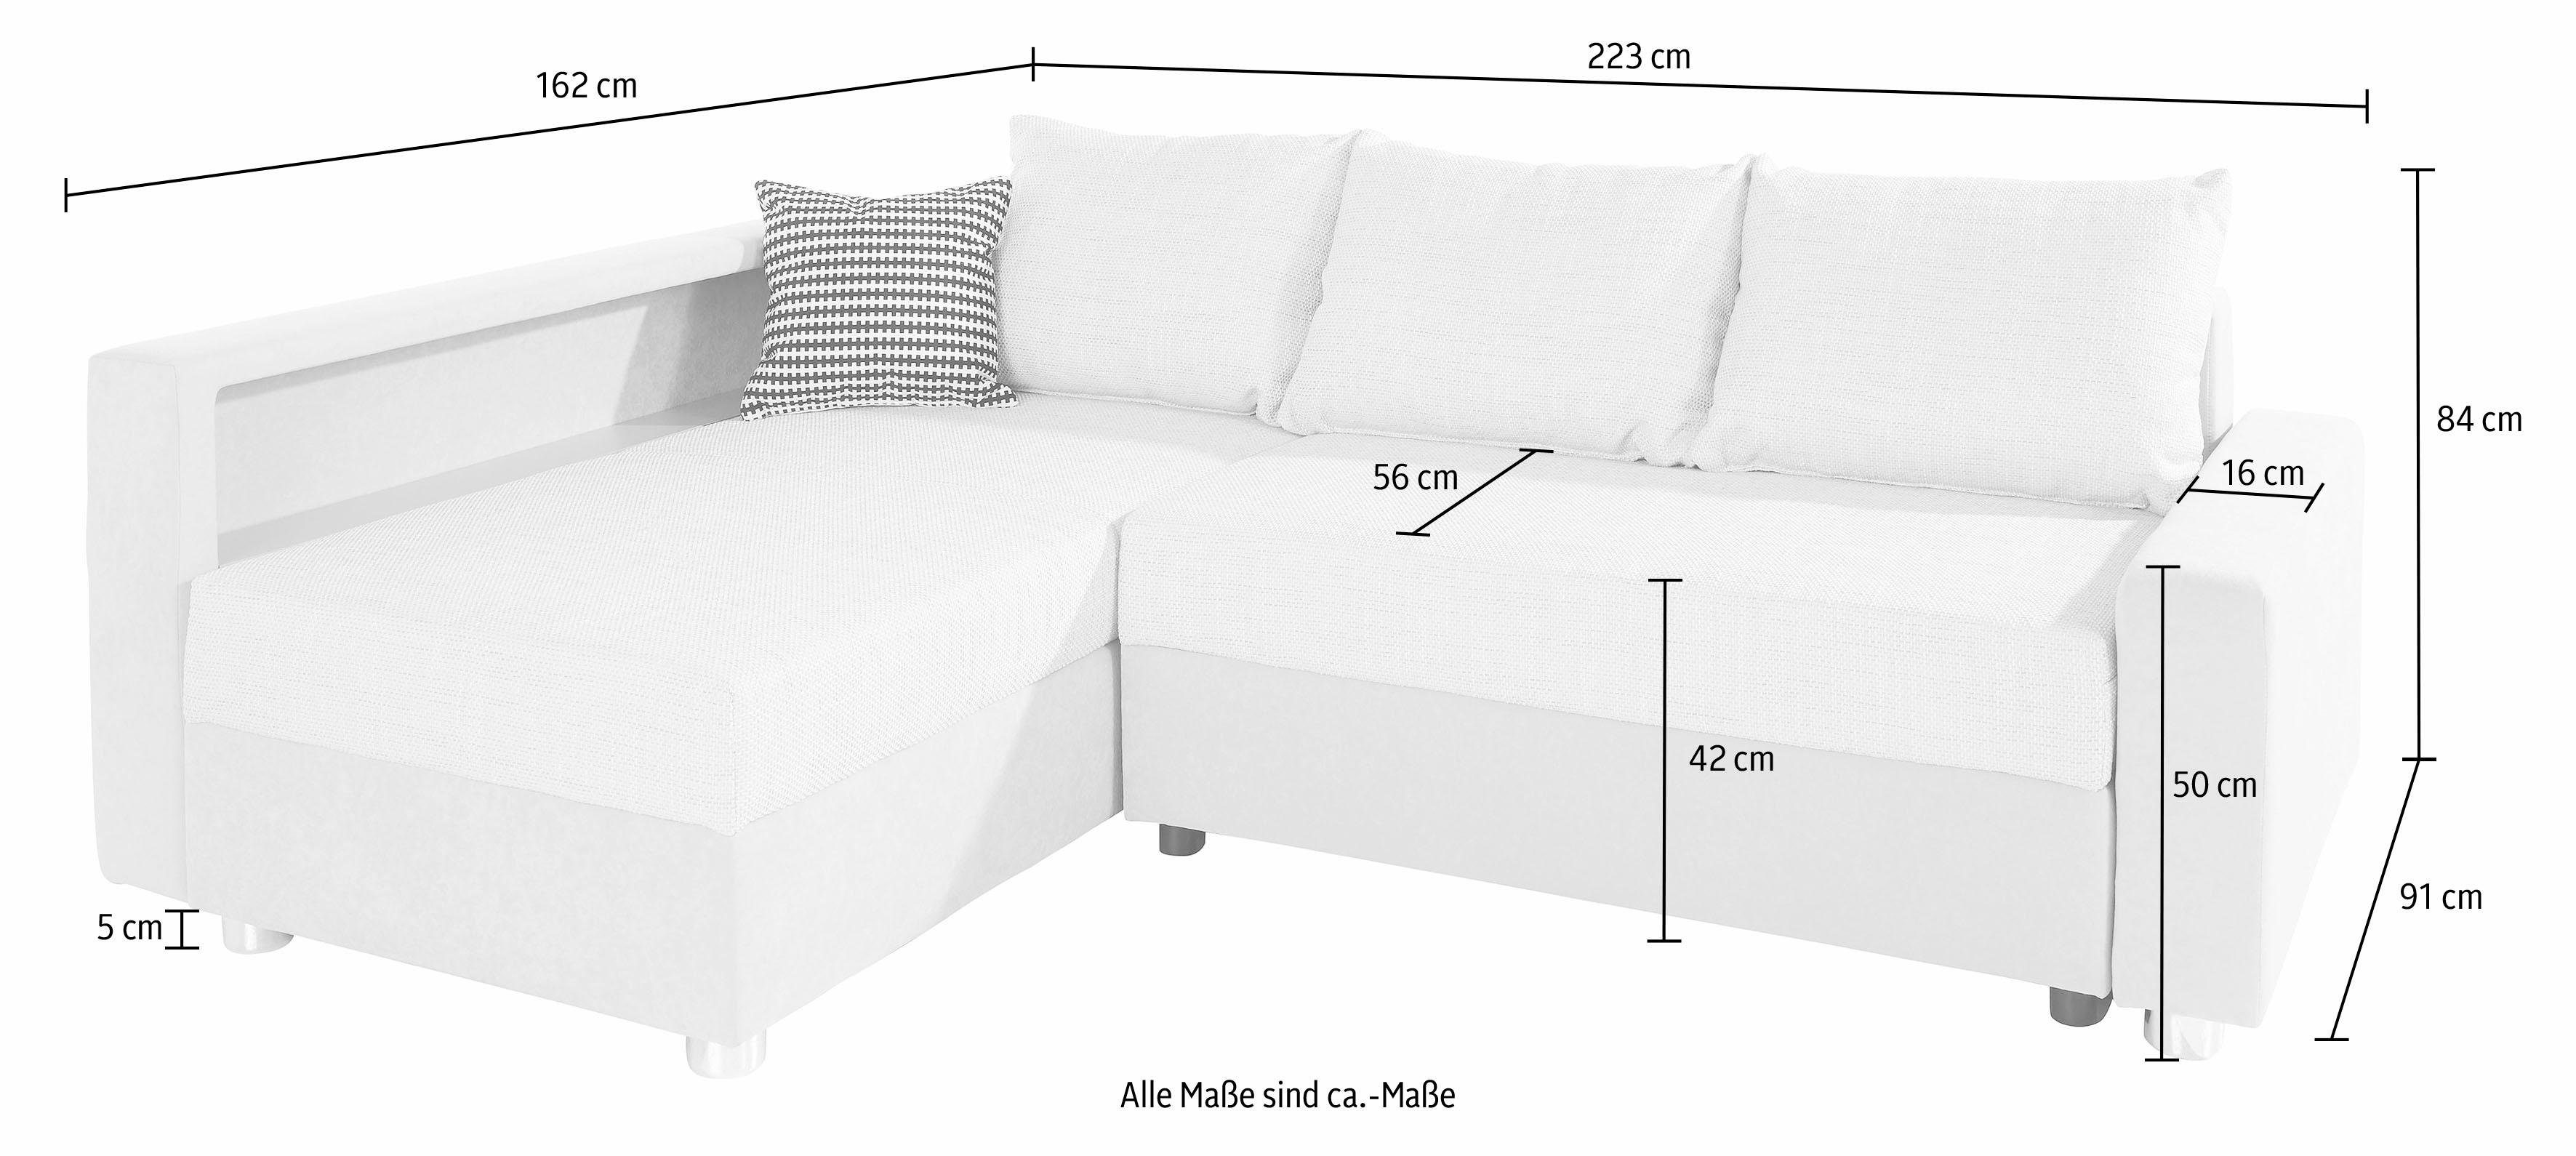 Federkern, Relax, Bettfunktion, wahlweise inklusive RGB-LED-Beleuchtung COLLECTION Ecksofa mit AB